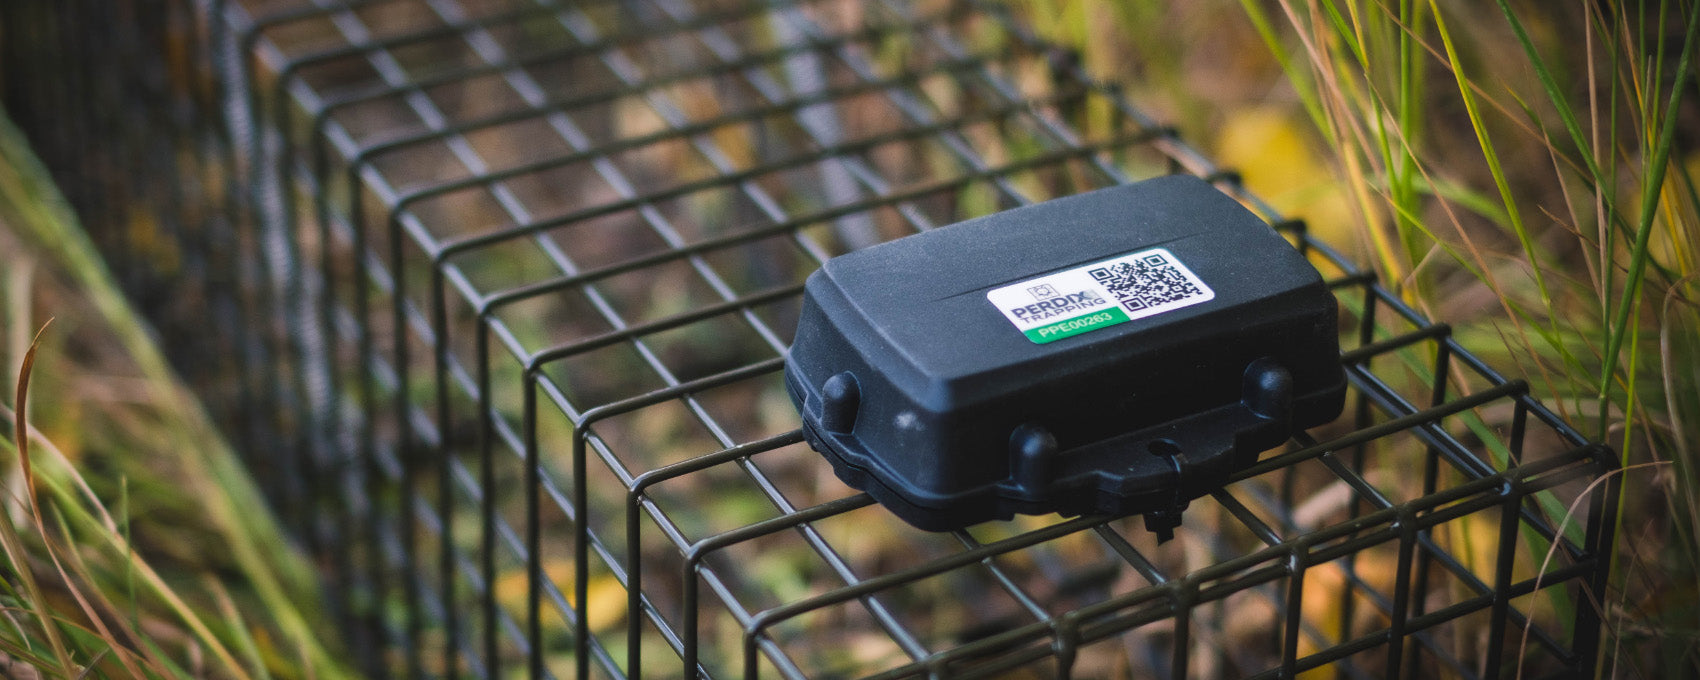 Hardware that can be linked to the PerdixPro system to allow remote monitoring of wildlife management, research and conservation activities.